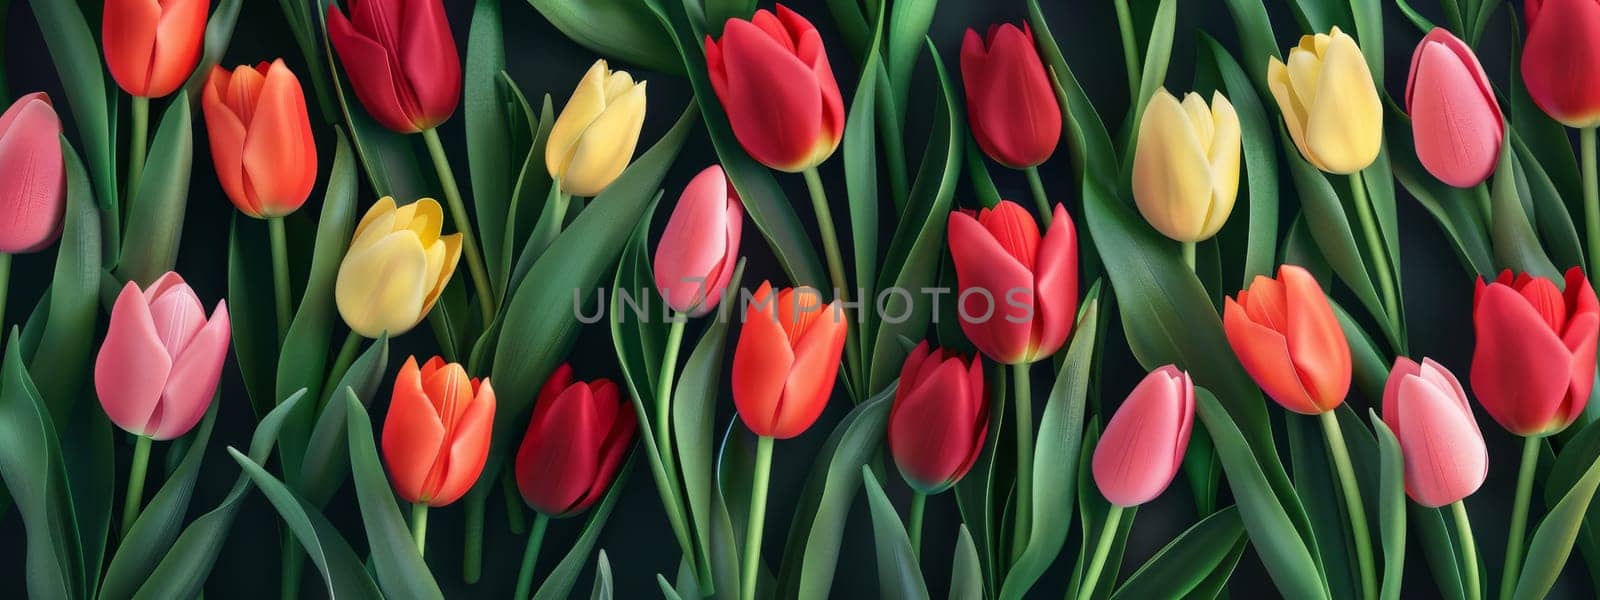 Tulips as spring background or texture, top view concept by Kadula